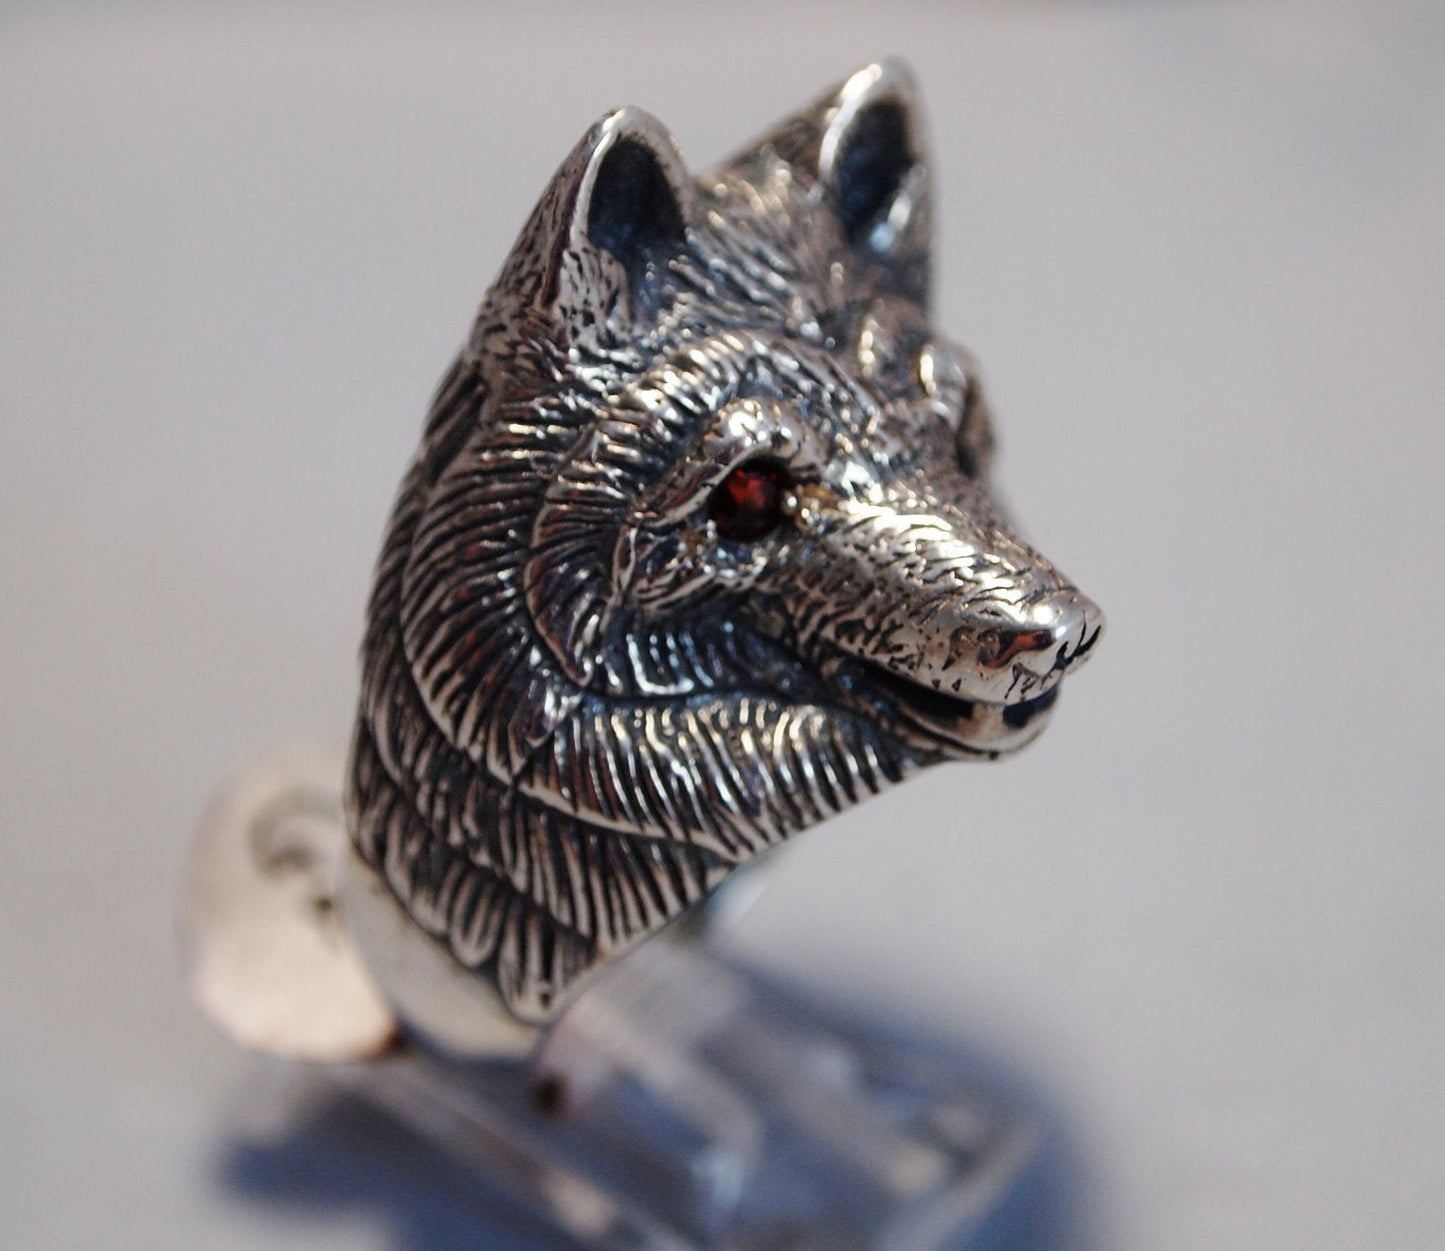 Wolf Ring with Gemstone Eyes in 925 Silver, Large Wolf Head Ring, Mens Wolf Ring, Silver Wolf Jewelry, Gemtone Wolf Jewellery, Gift For Wolf Lover, Silver Wolf Ring, Gemstone Wolf Ring, Mens Silver Wolf Ring, Birthstone Wolf Ring, 925 Wolf Ring